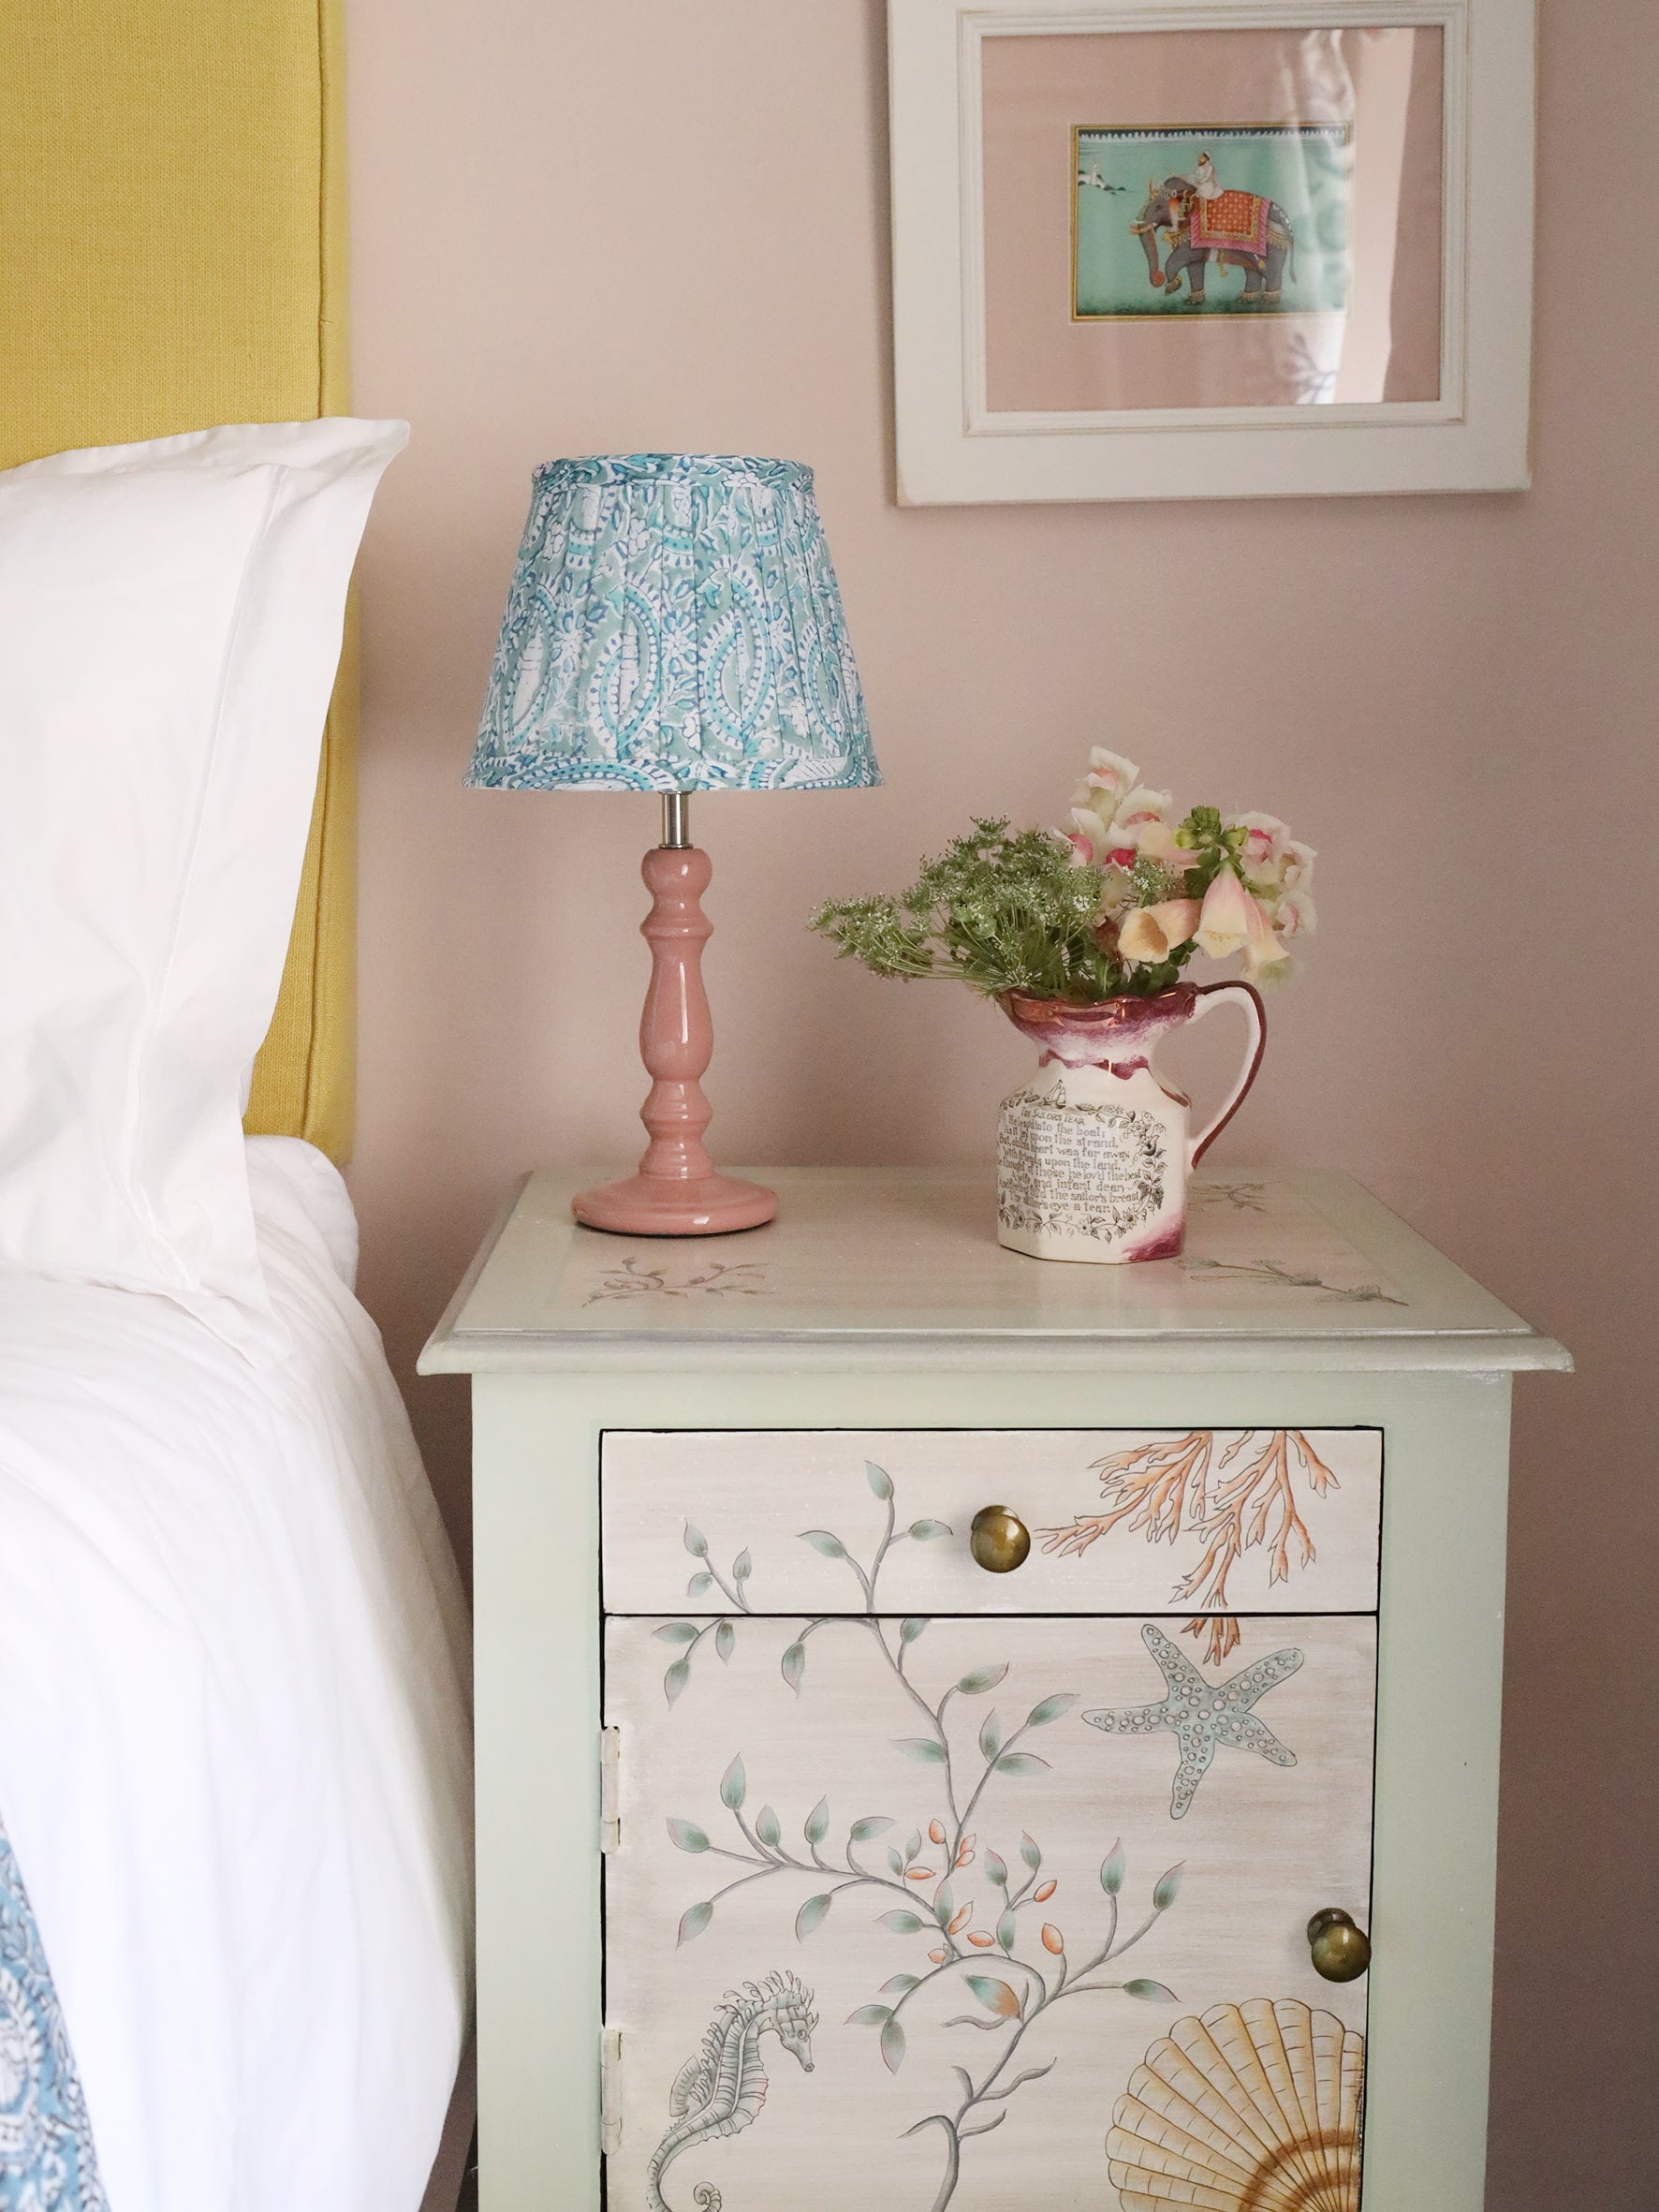 Small pleated Seafoam Paisley Shell lampshade in hand blocked print on a pink lampbase.The lampbase is on a bedside cabinet with a small jug with flowers.It is next to a bed,on the wall is a painting of a man on an elephant